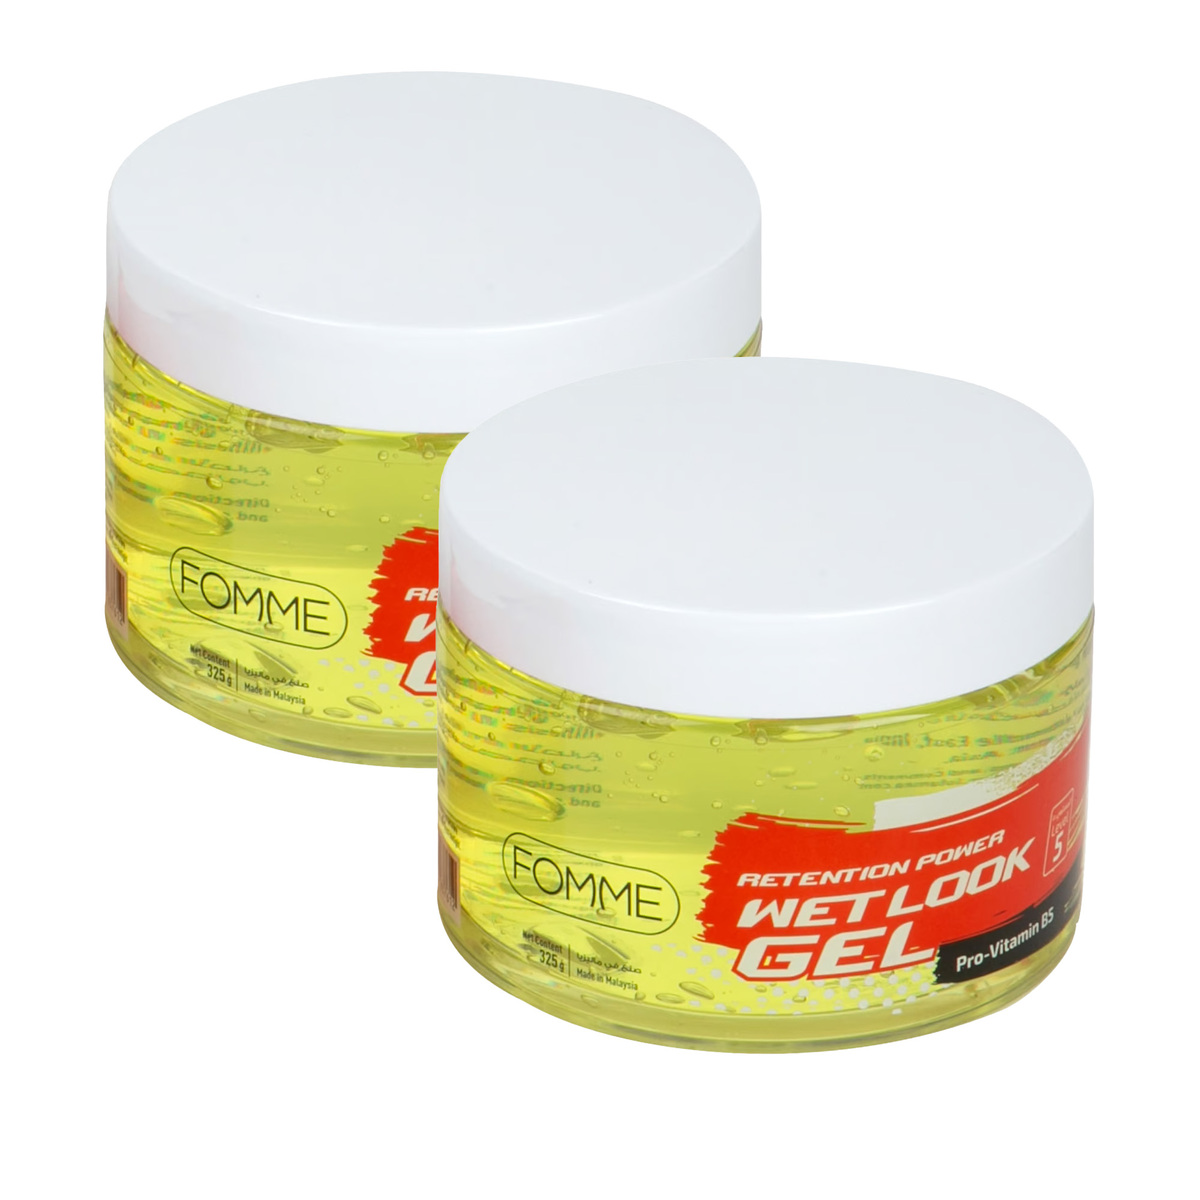 Fomme Retention Power Wet Look Hair Gel Yellow 2 x 325 g